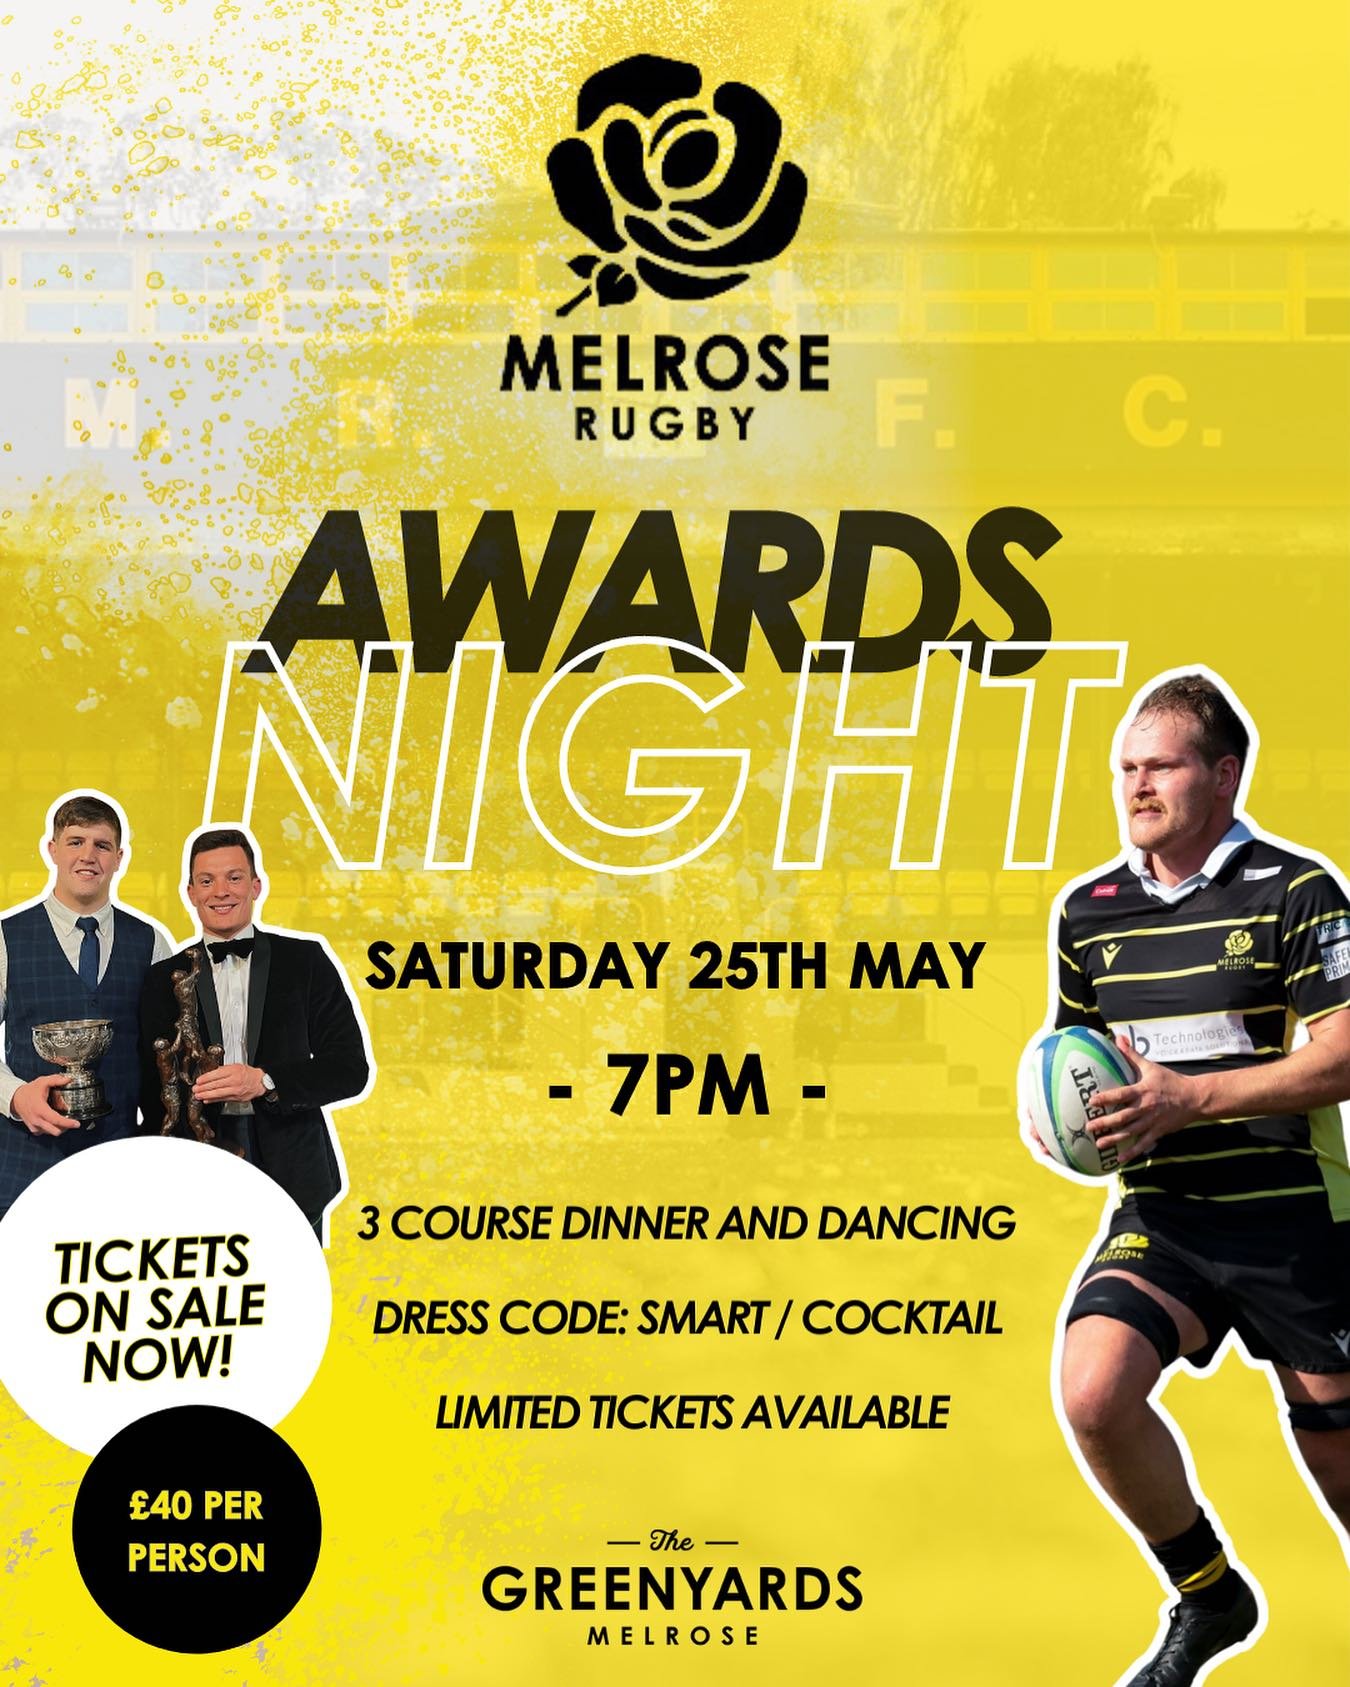 𝘼𝙬𝙖𝙧𝙙𝙨 𝙉𝙞𝙜𝙝𝙩 🏆

Tickets for this seasons Awards Night are now on sale for Melrose Rugby Club members! There is only a limited number of spaces available so don&rsquo;t miss out&hellip;

⏰ 7pm start
🗓️ Saturday 25th May
🍸 Dress code: sma